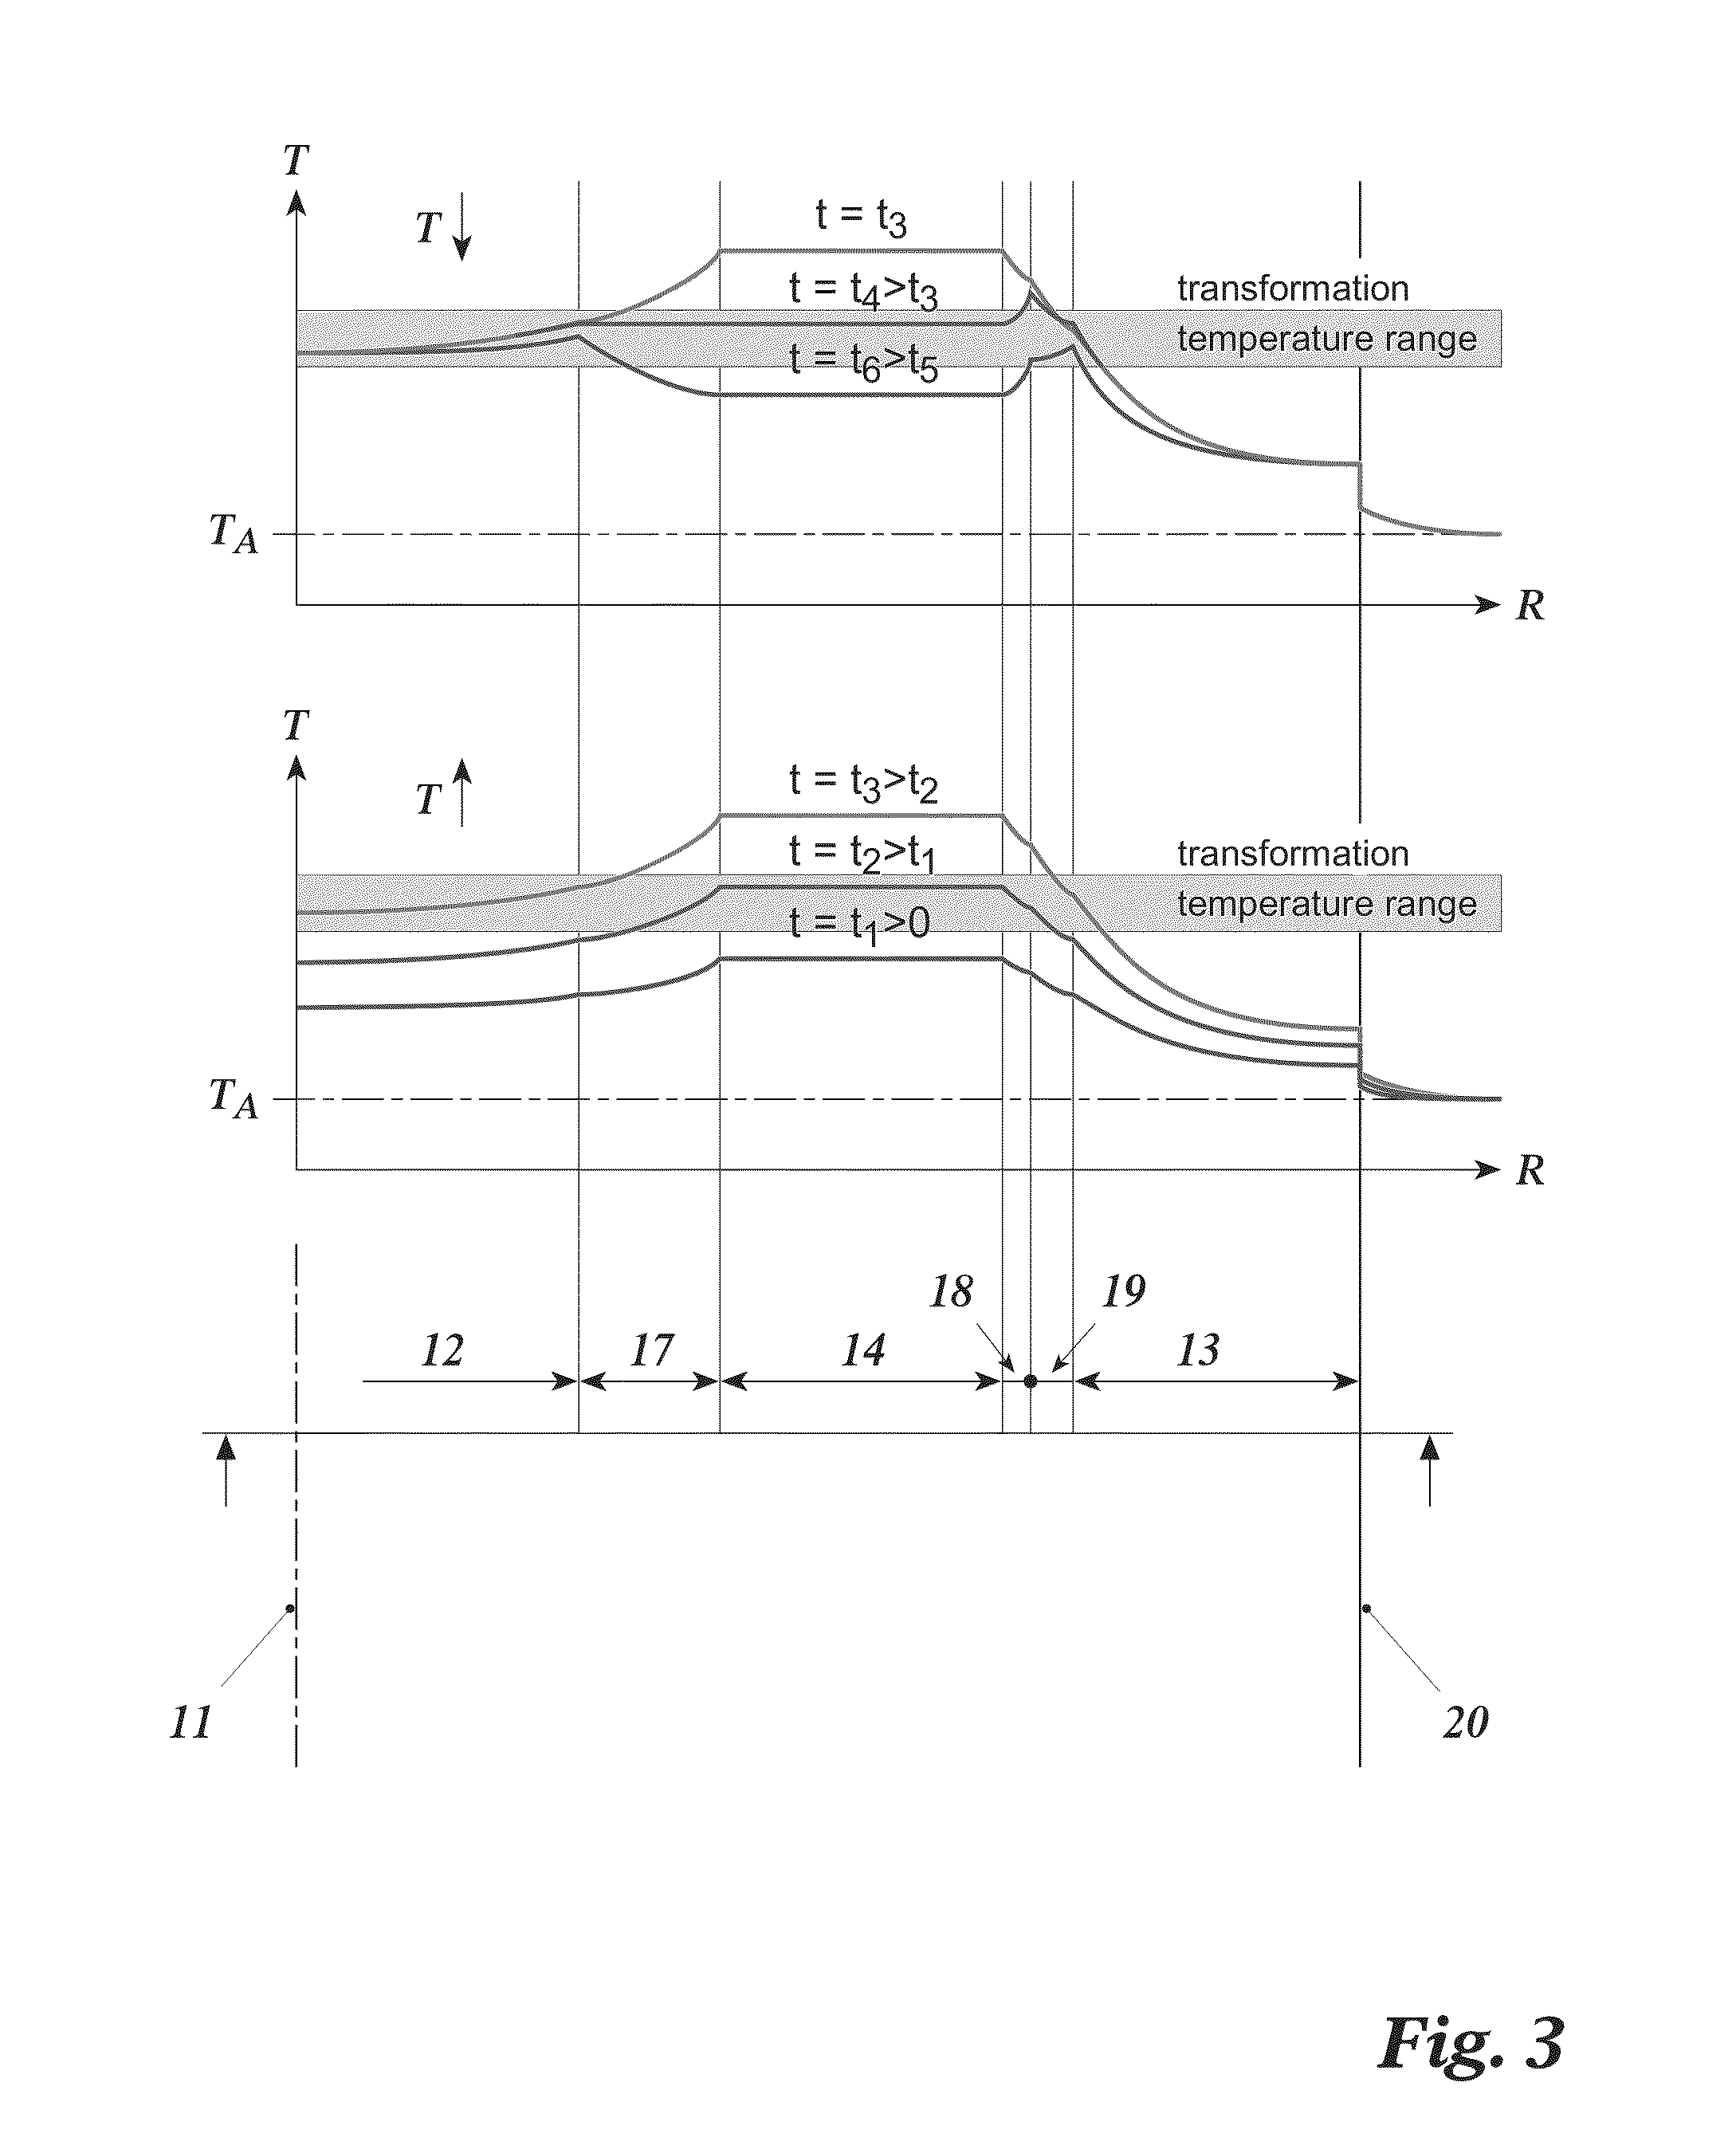 Self-Adjusting Device for Controlling the Clearance Between Rotating and Stationary Components of a Thermally Loaded Turbo Machine